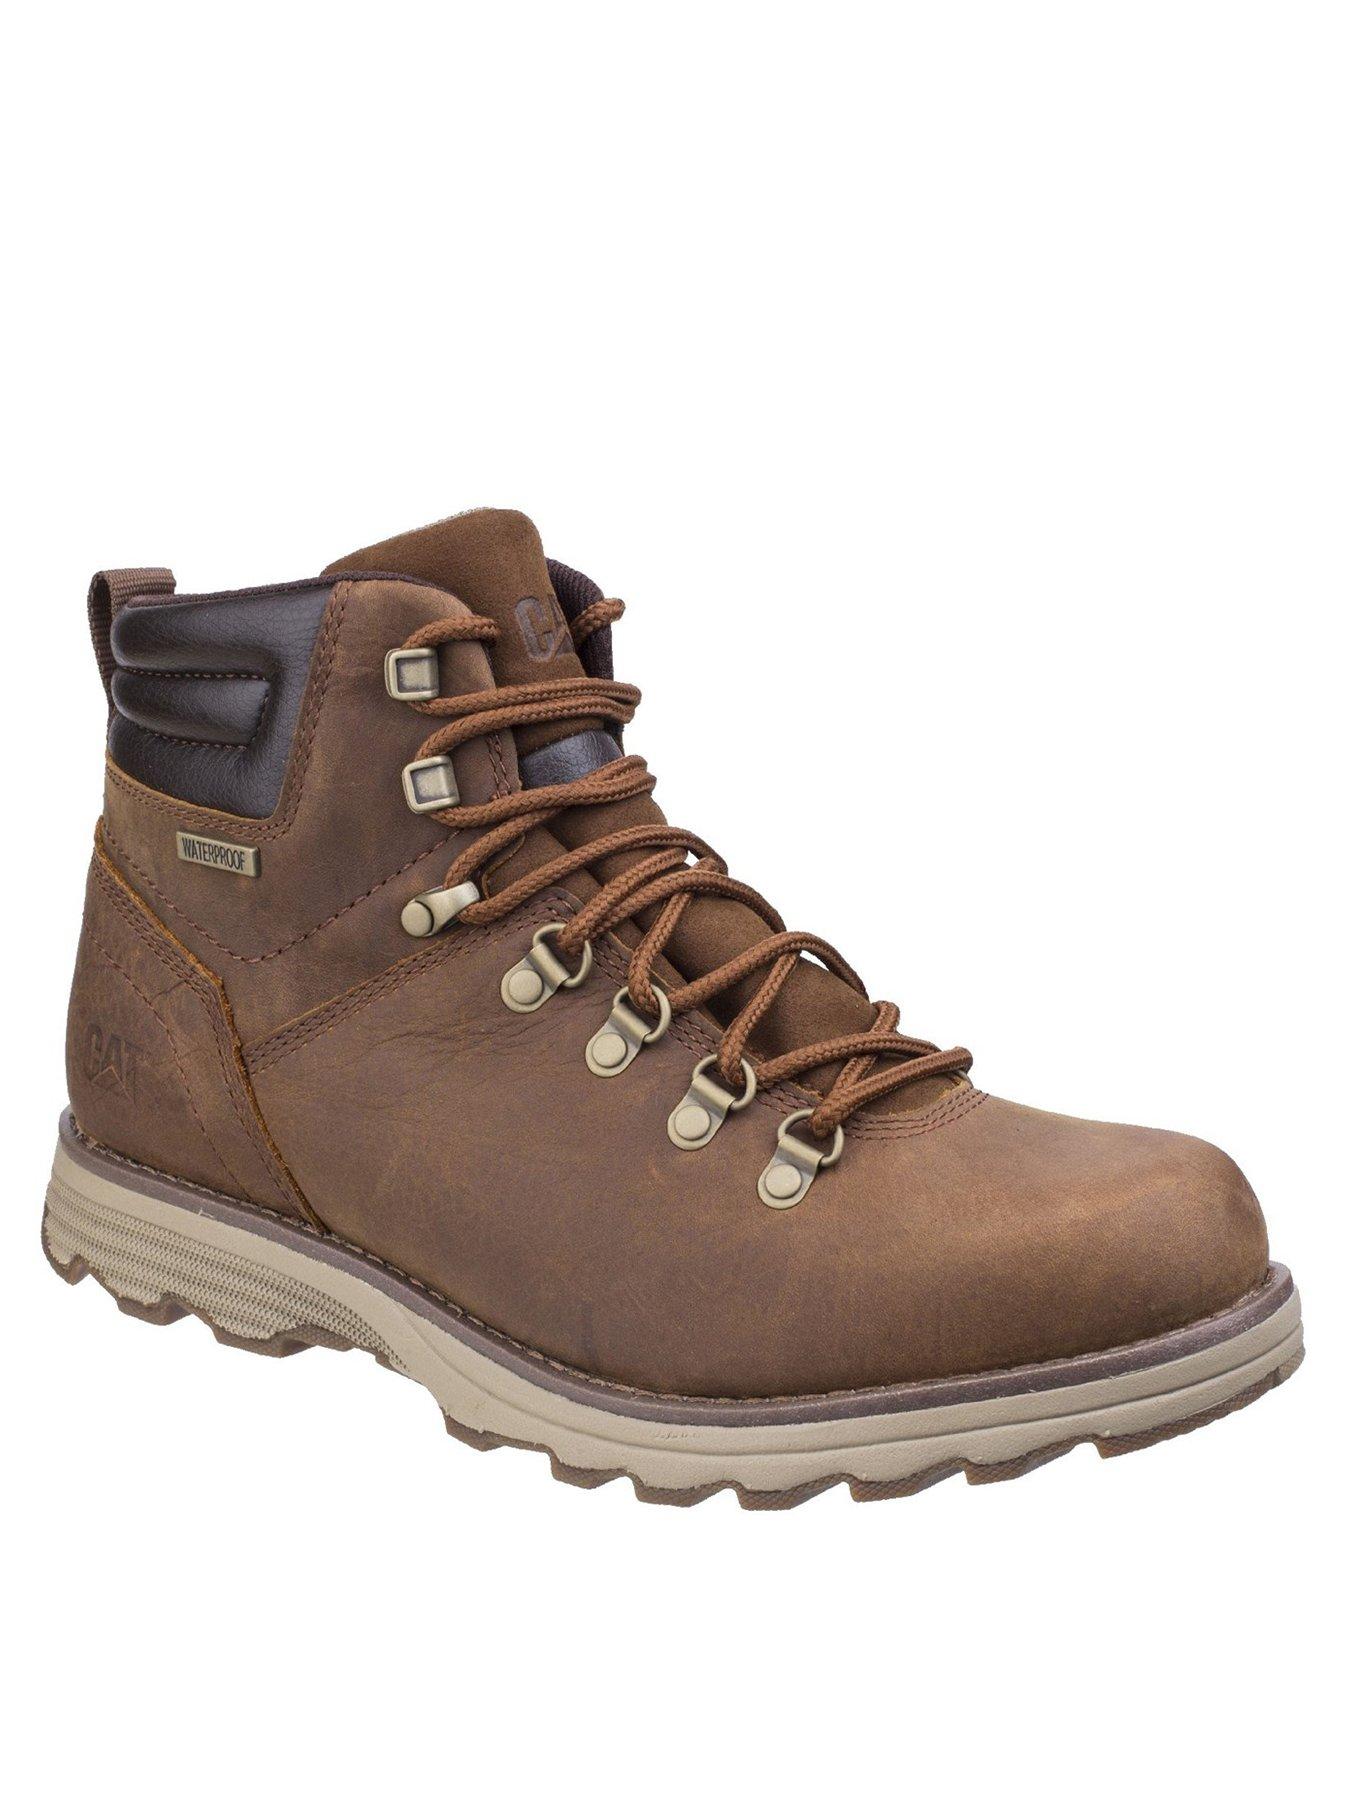 Shoes & boots Lifestyle Sire Boot - Brown